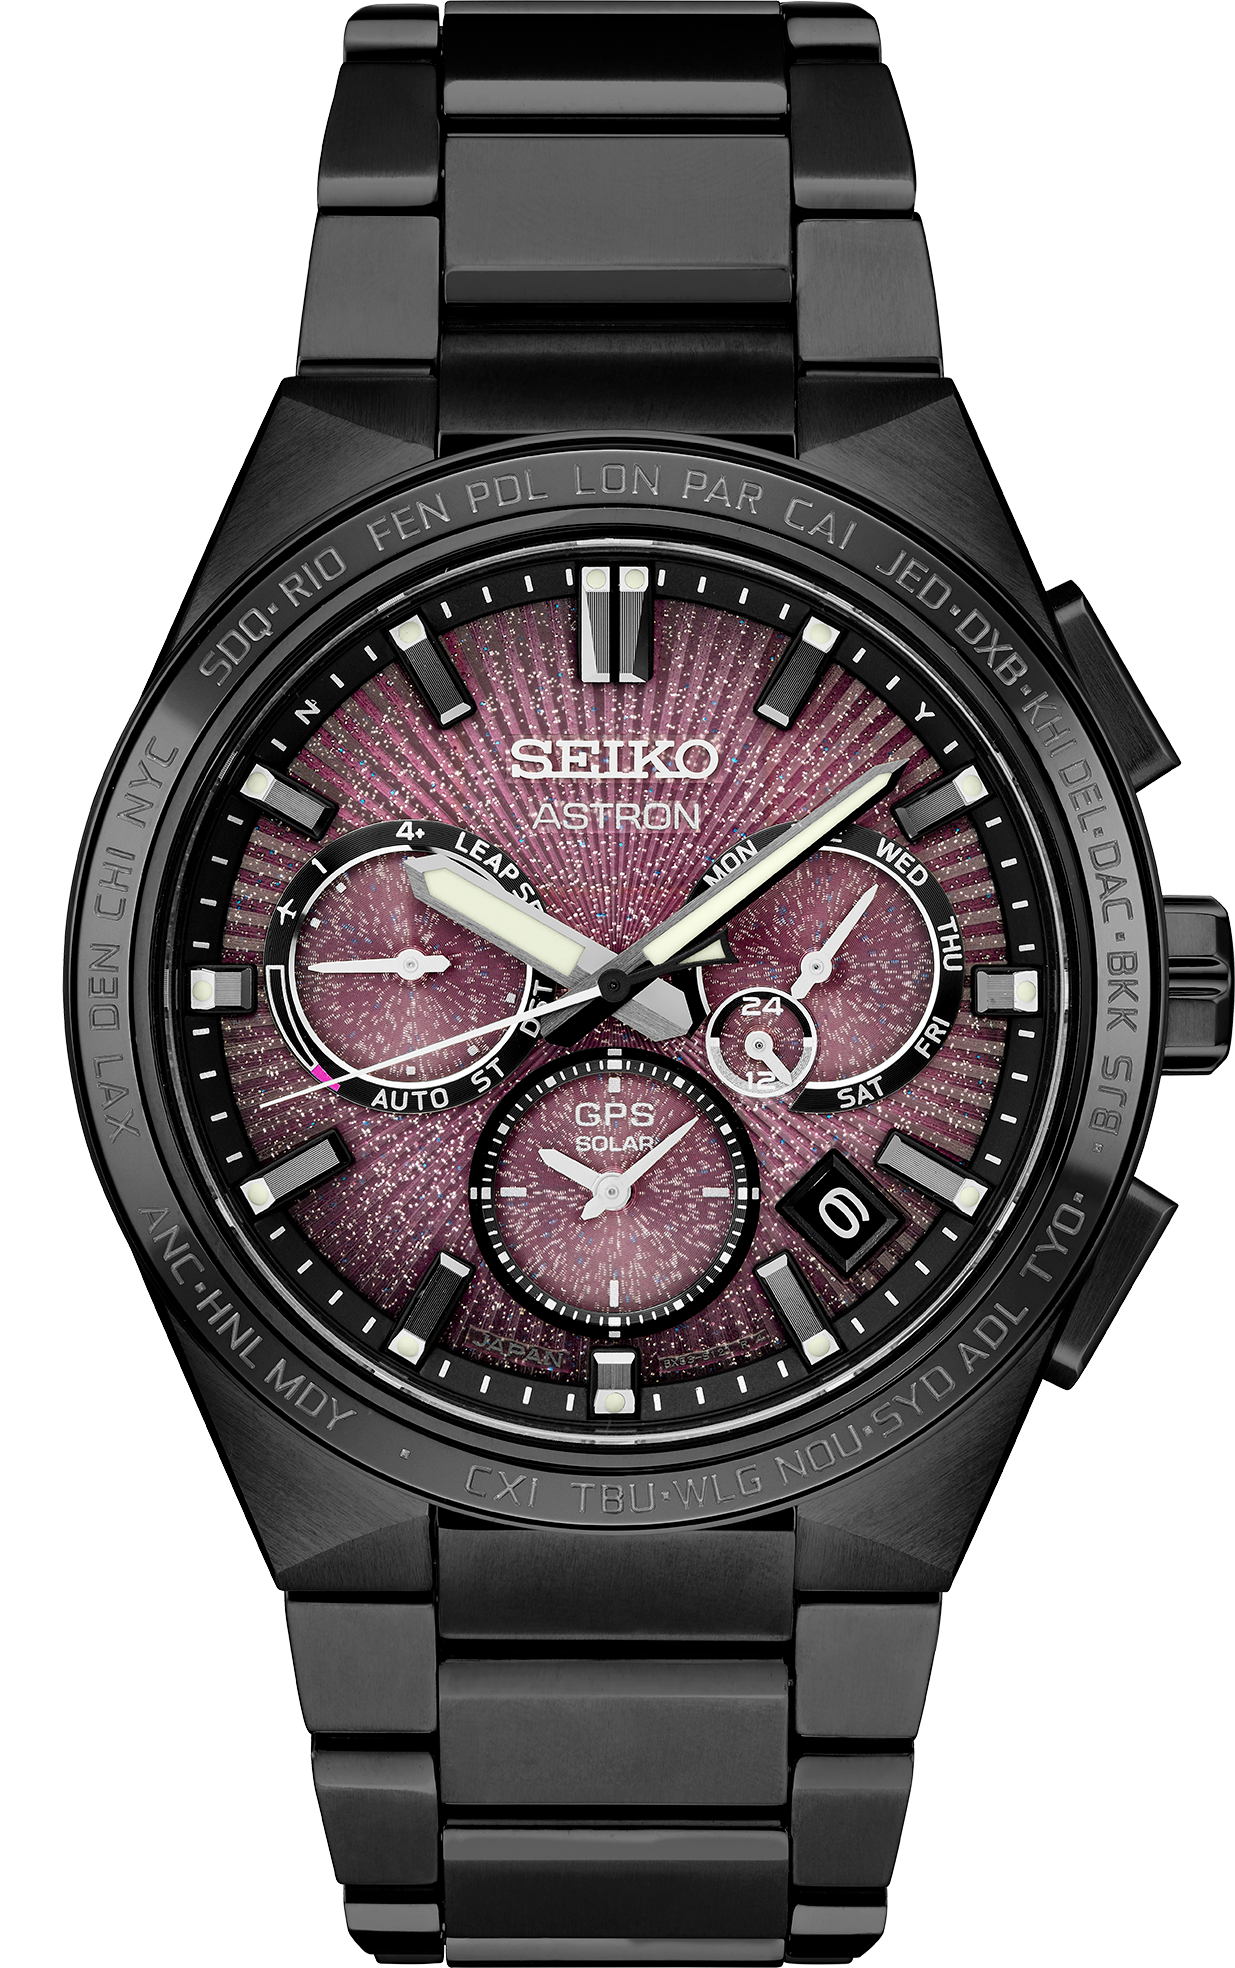 THE GPS SOLAR ASTRON 10TH ANNIVERSARY LIMITED EDITION SSH123